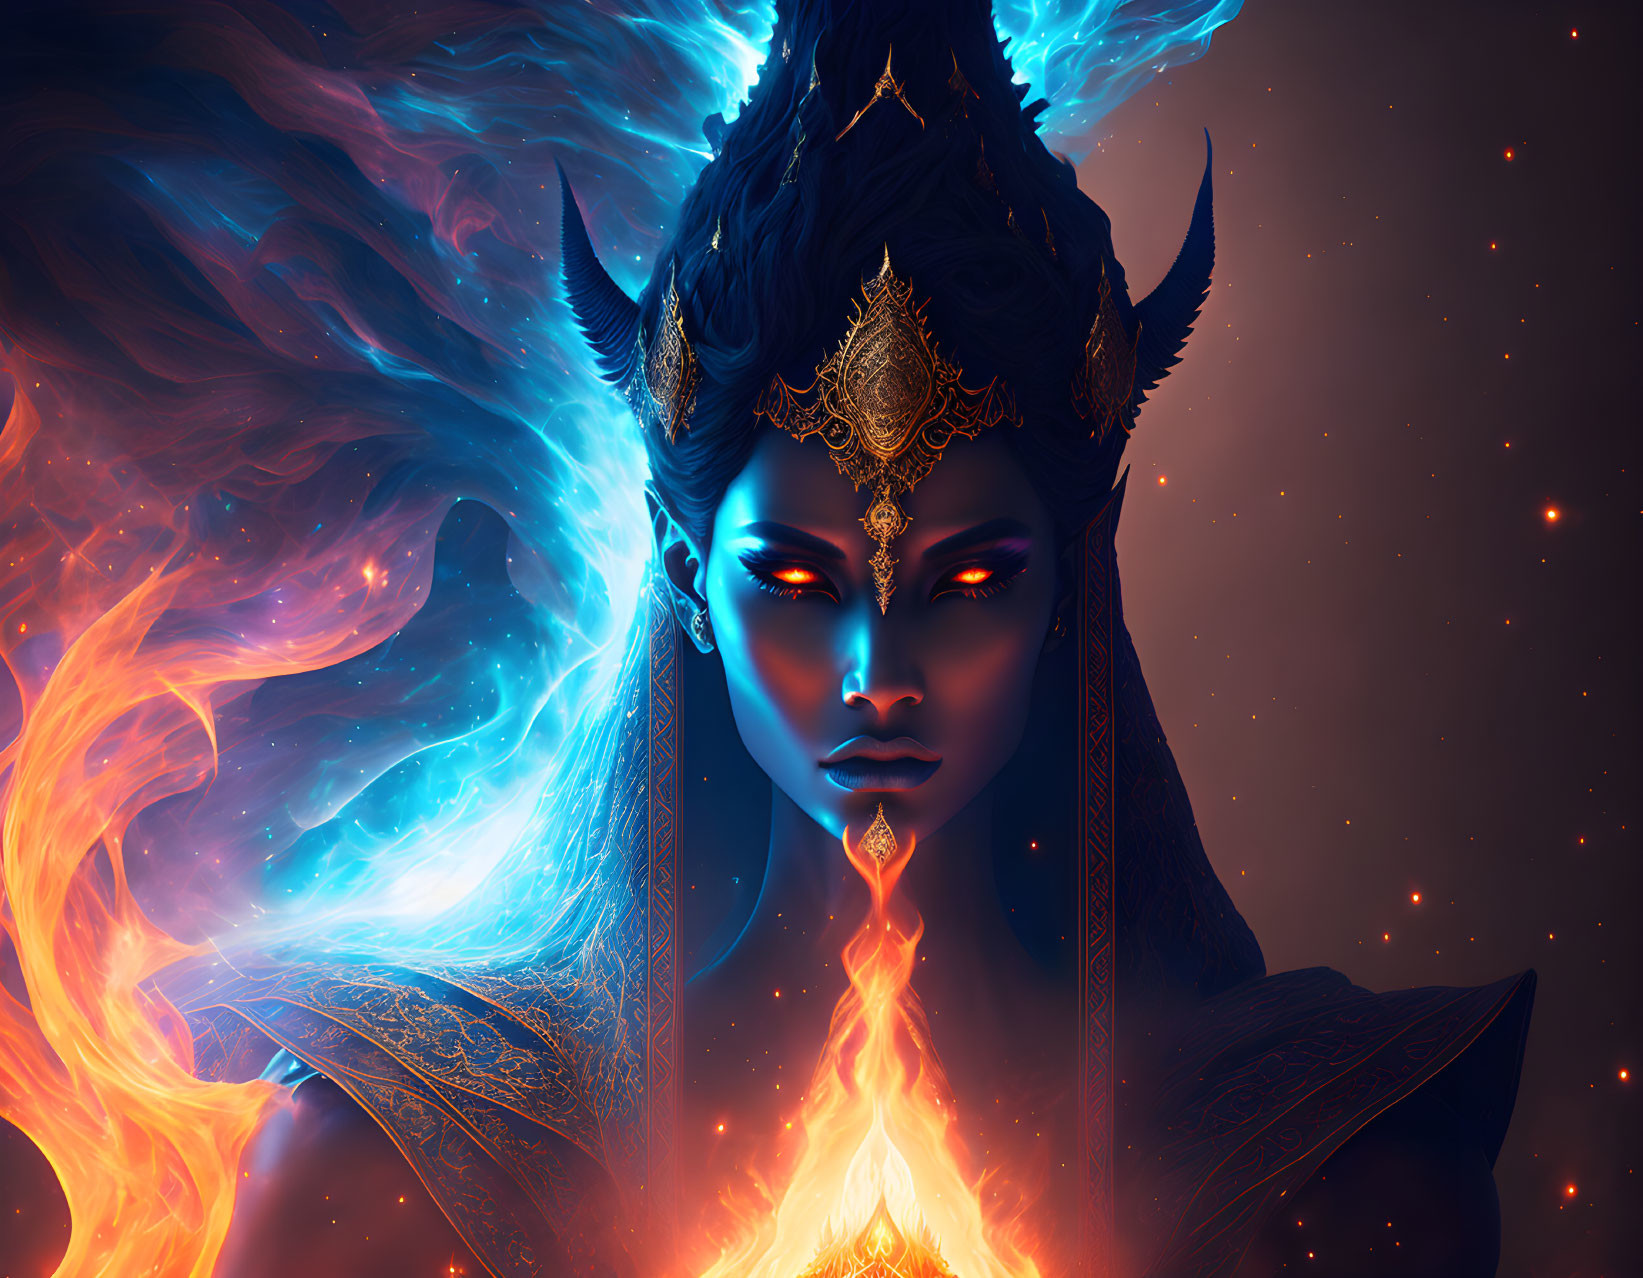 Blue-skinned mystical figure with golden headpiece engulfed in blue flames on starry backdrop